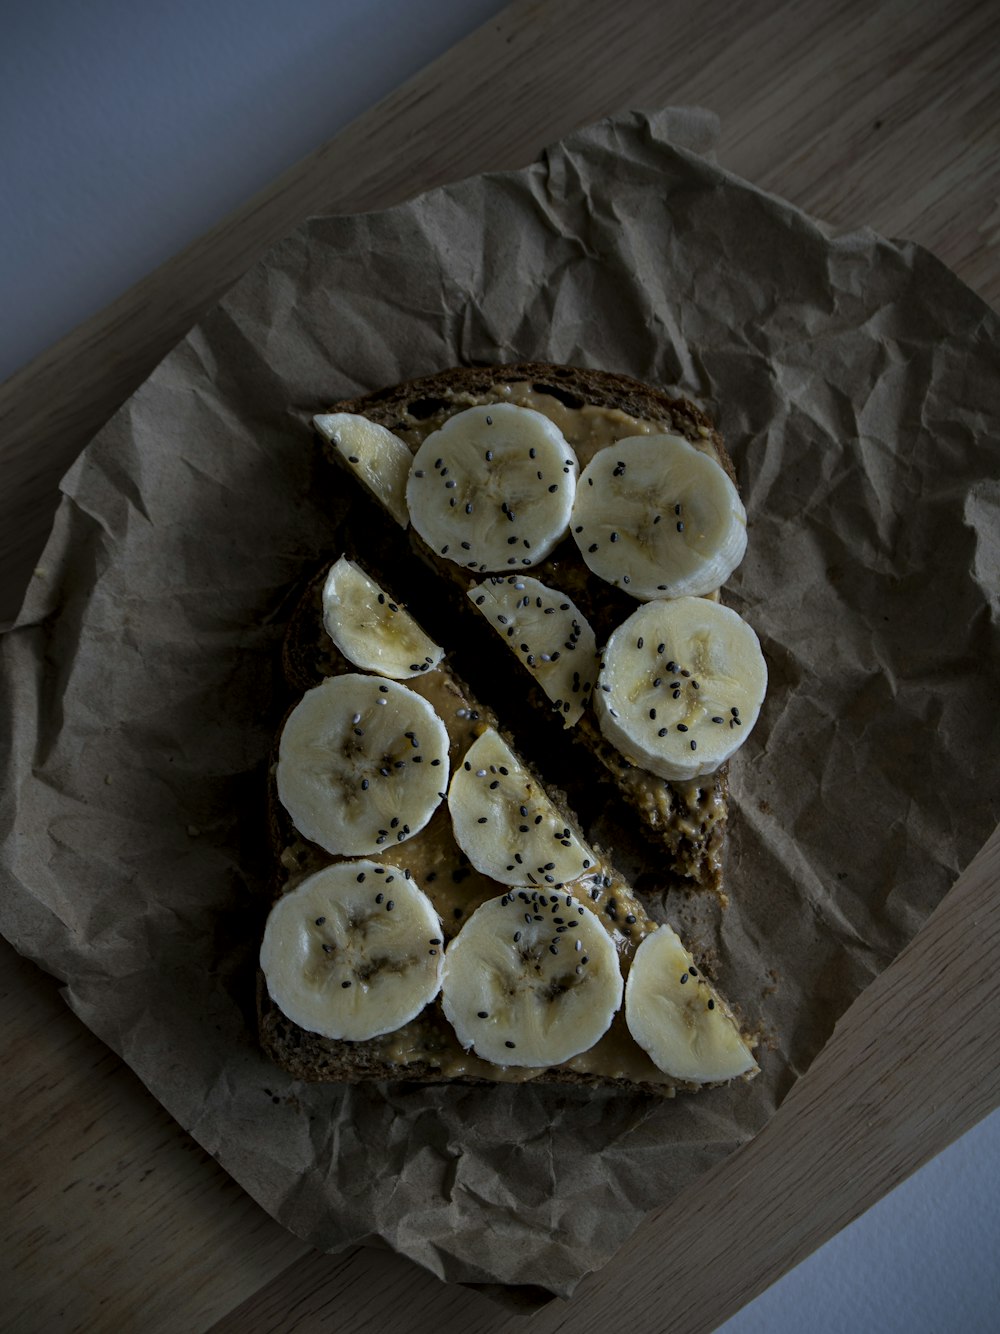 a piece of bread with sliced bananas on it